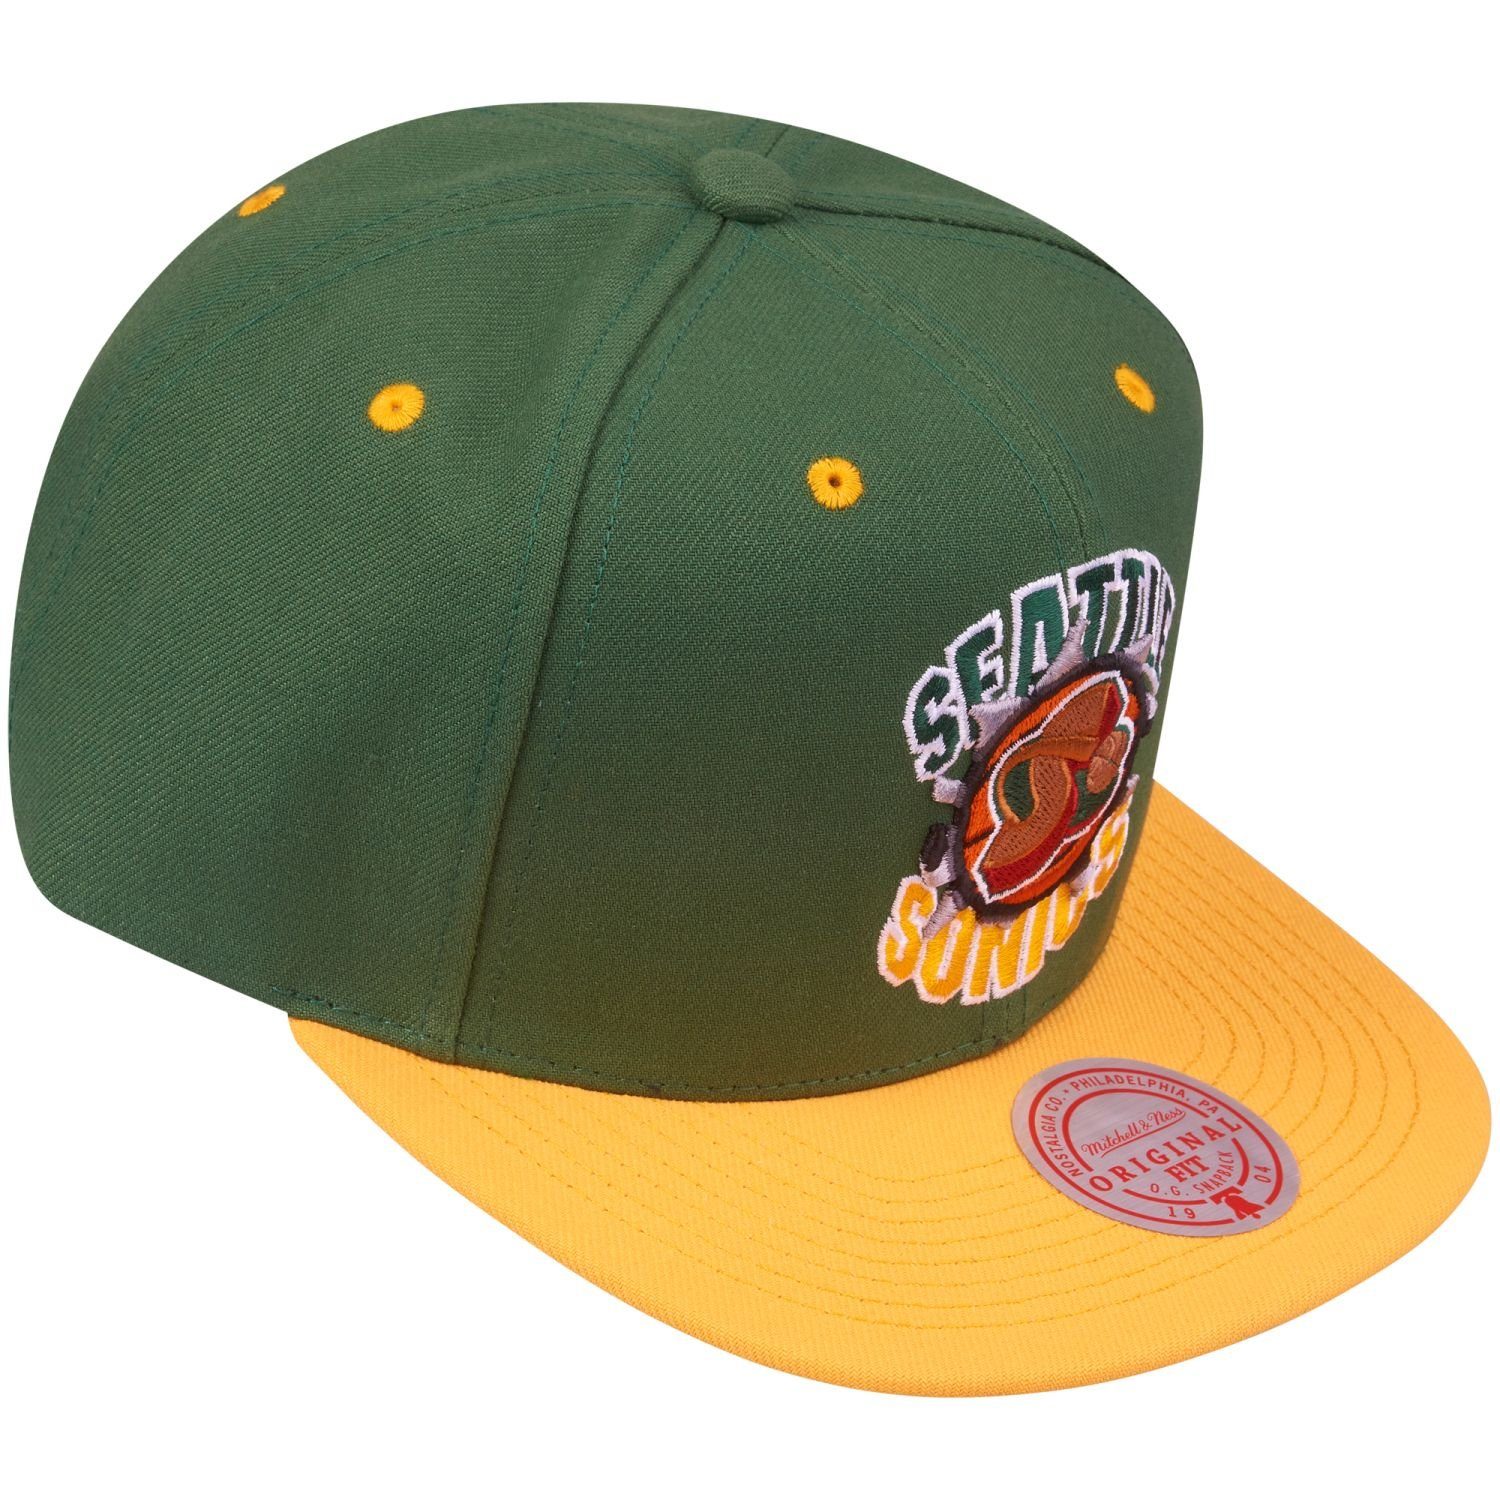 Supersonic BREAKTHROUGH Seattle Cap Mitchell Ness & Snapback